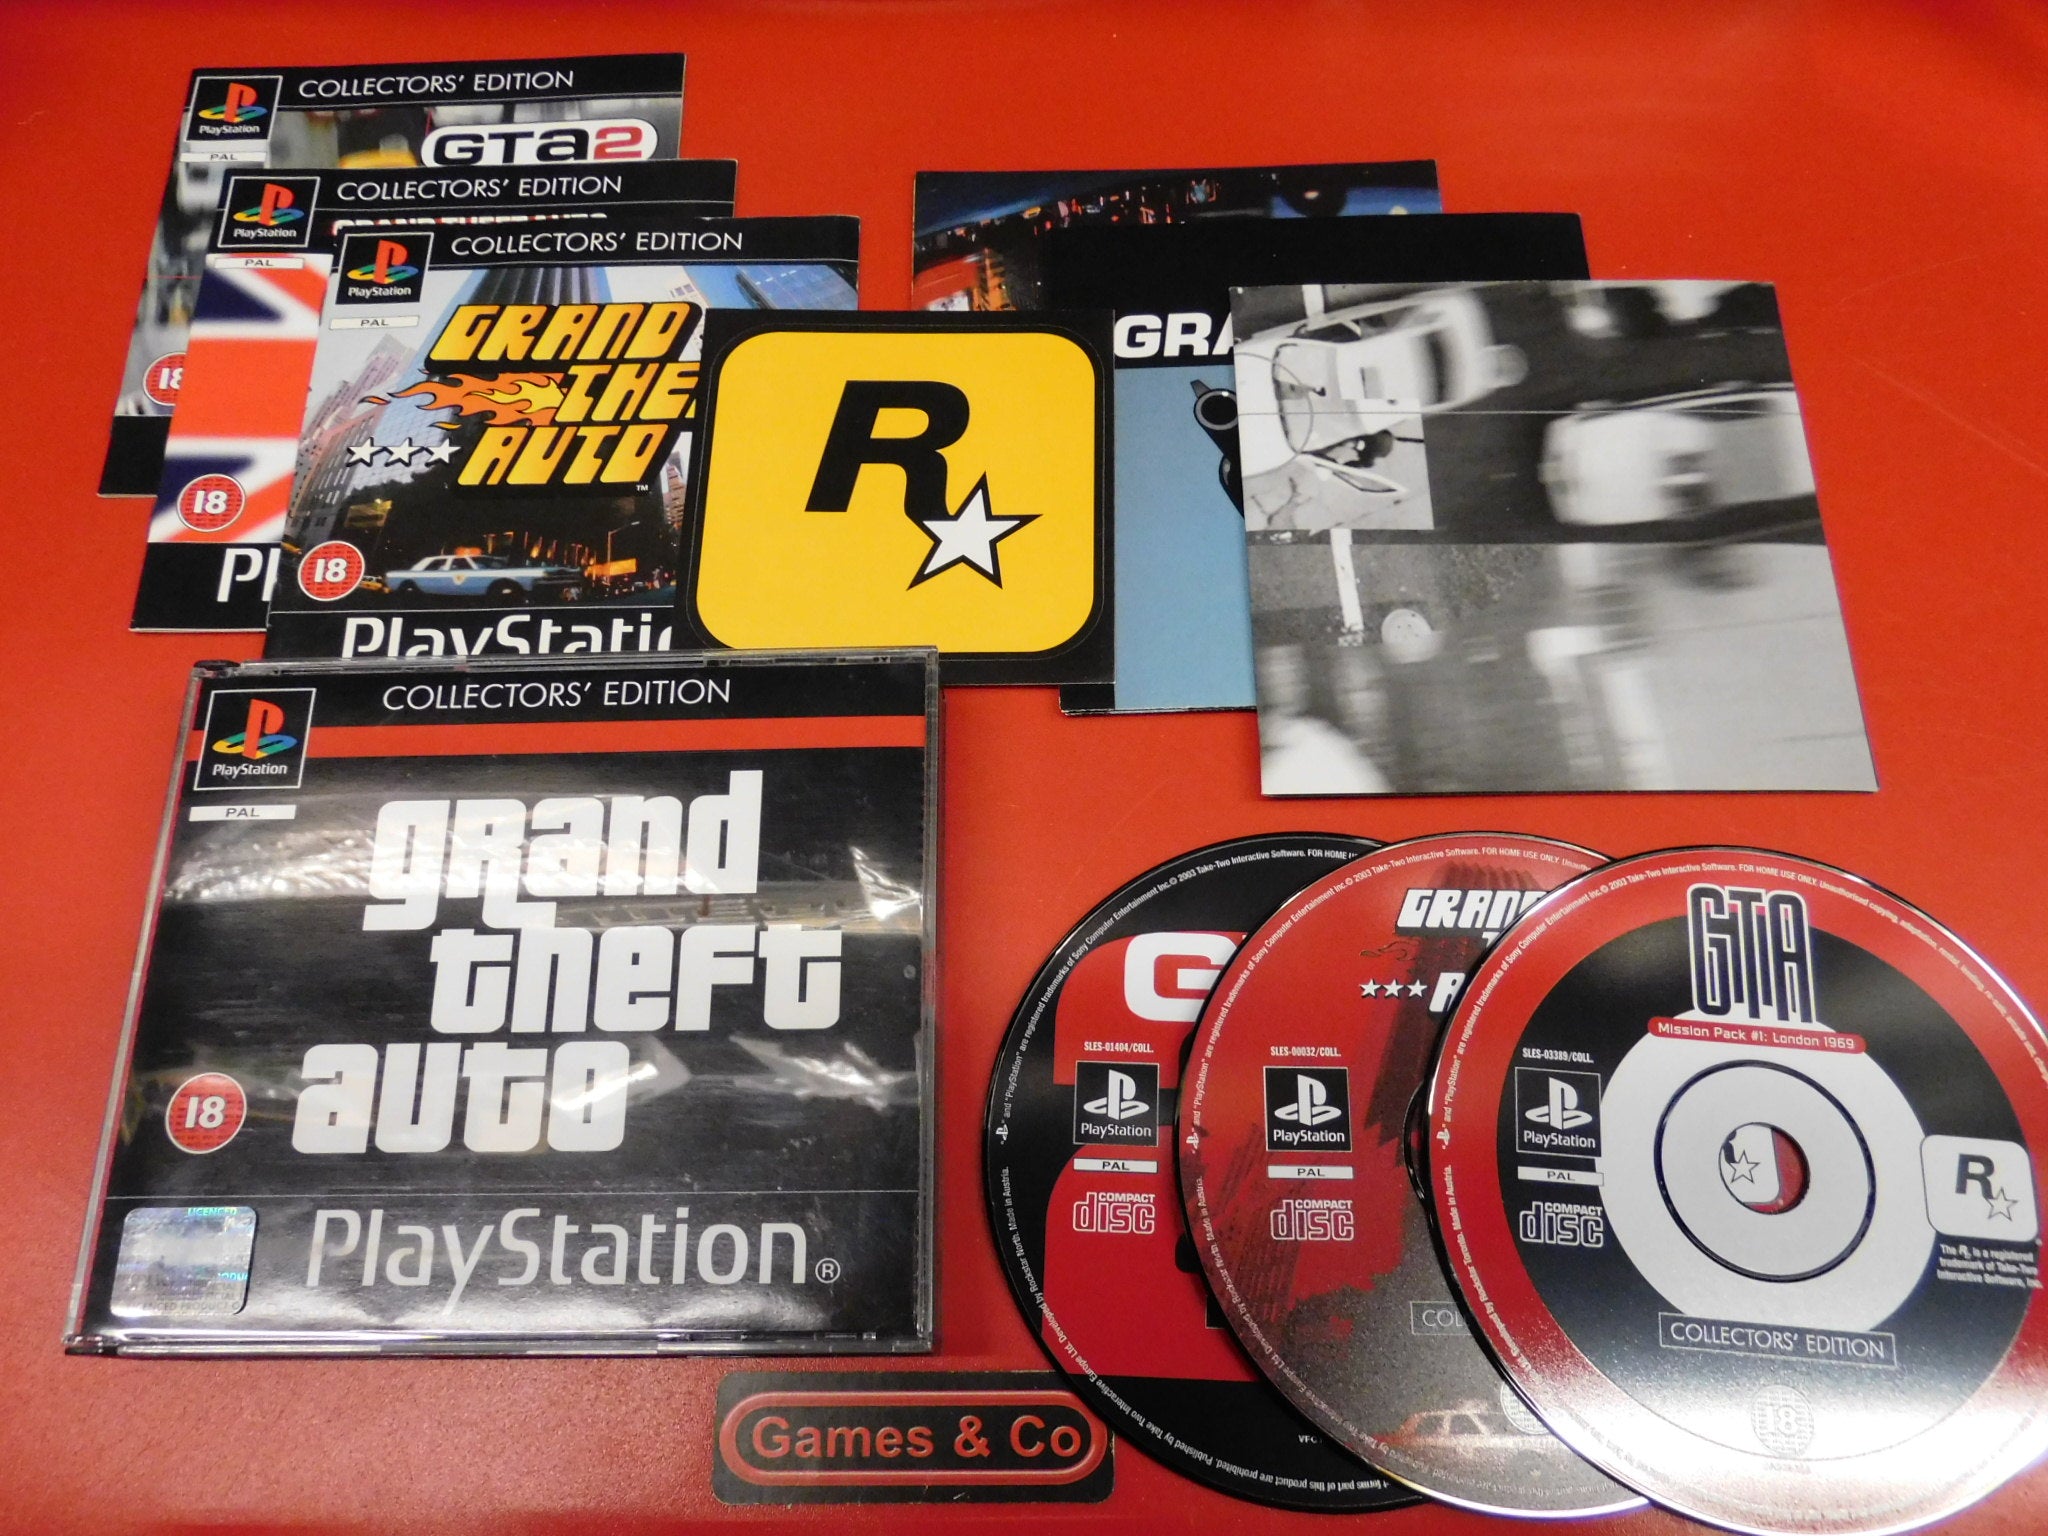 GRAND THEFT AUTO COLLECTOR'S EDITION